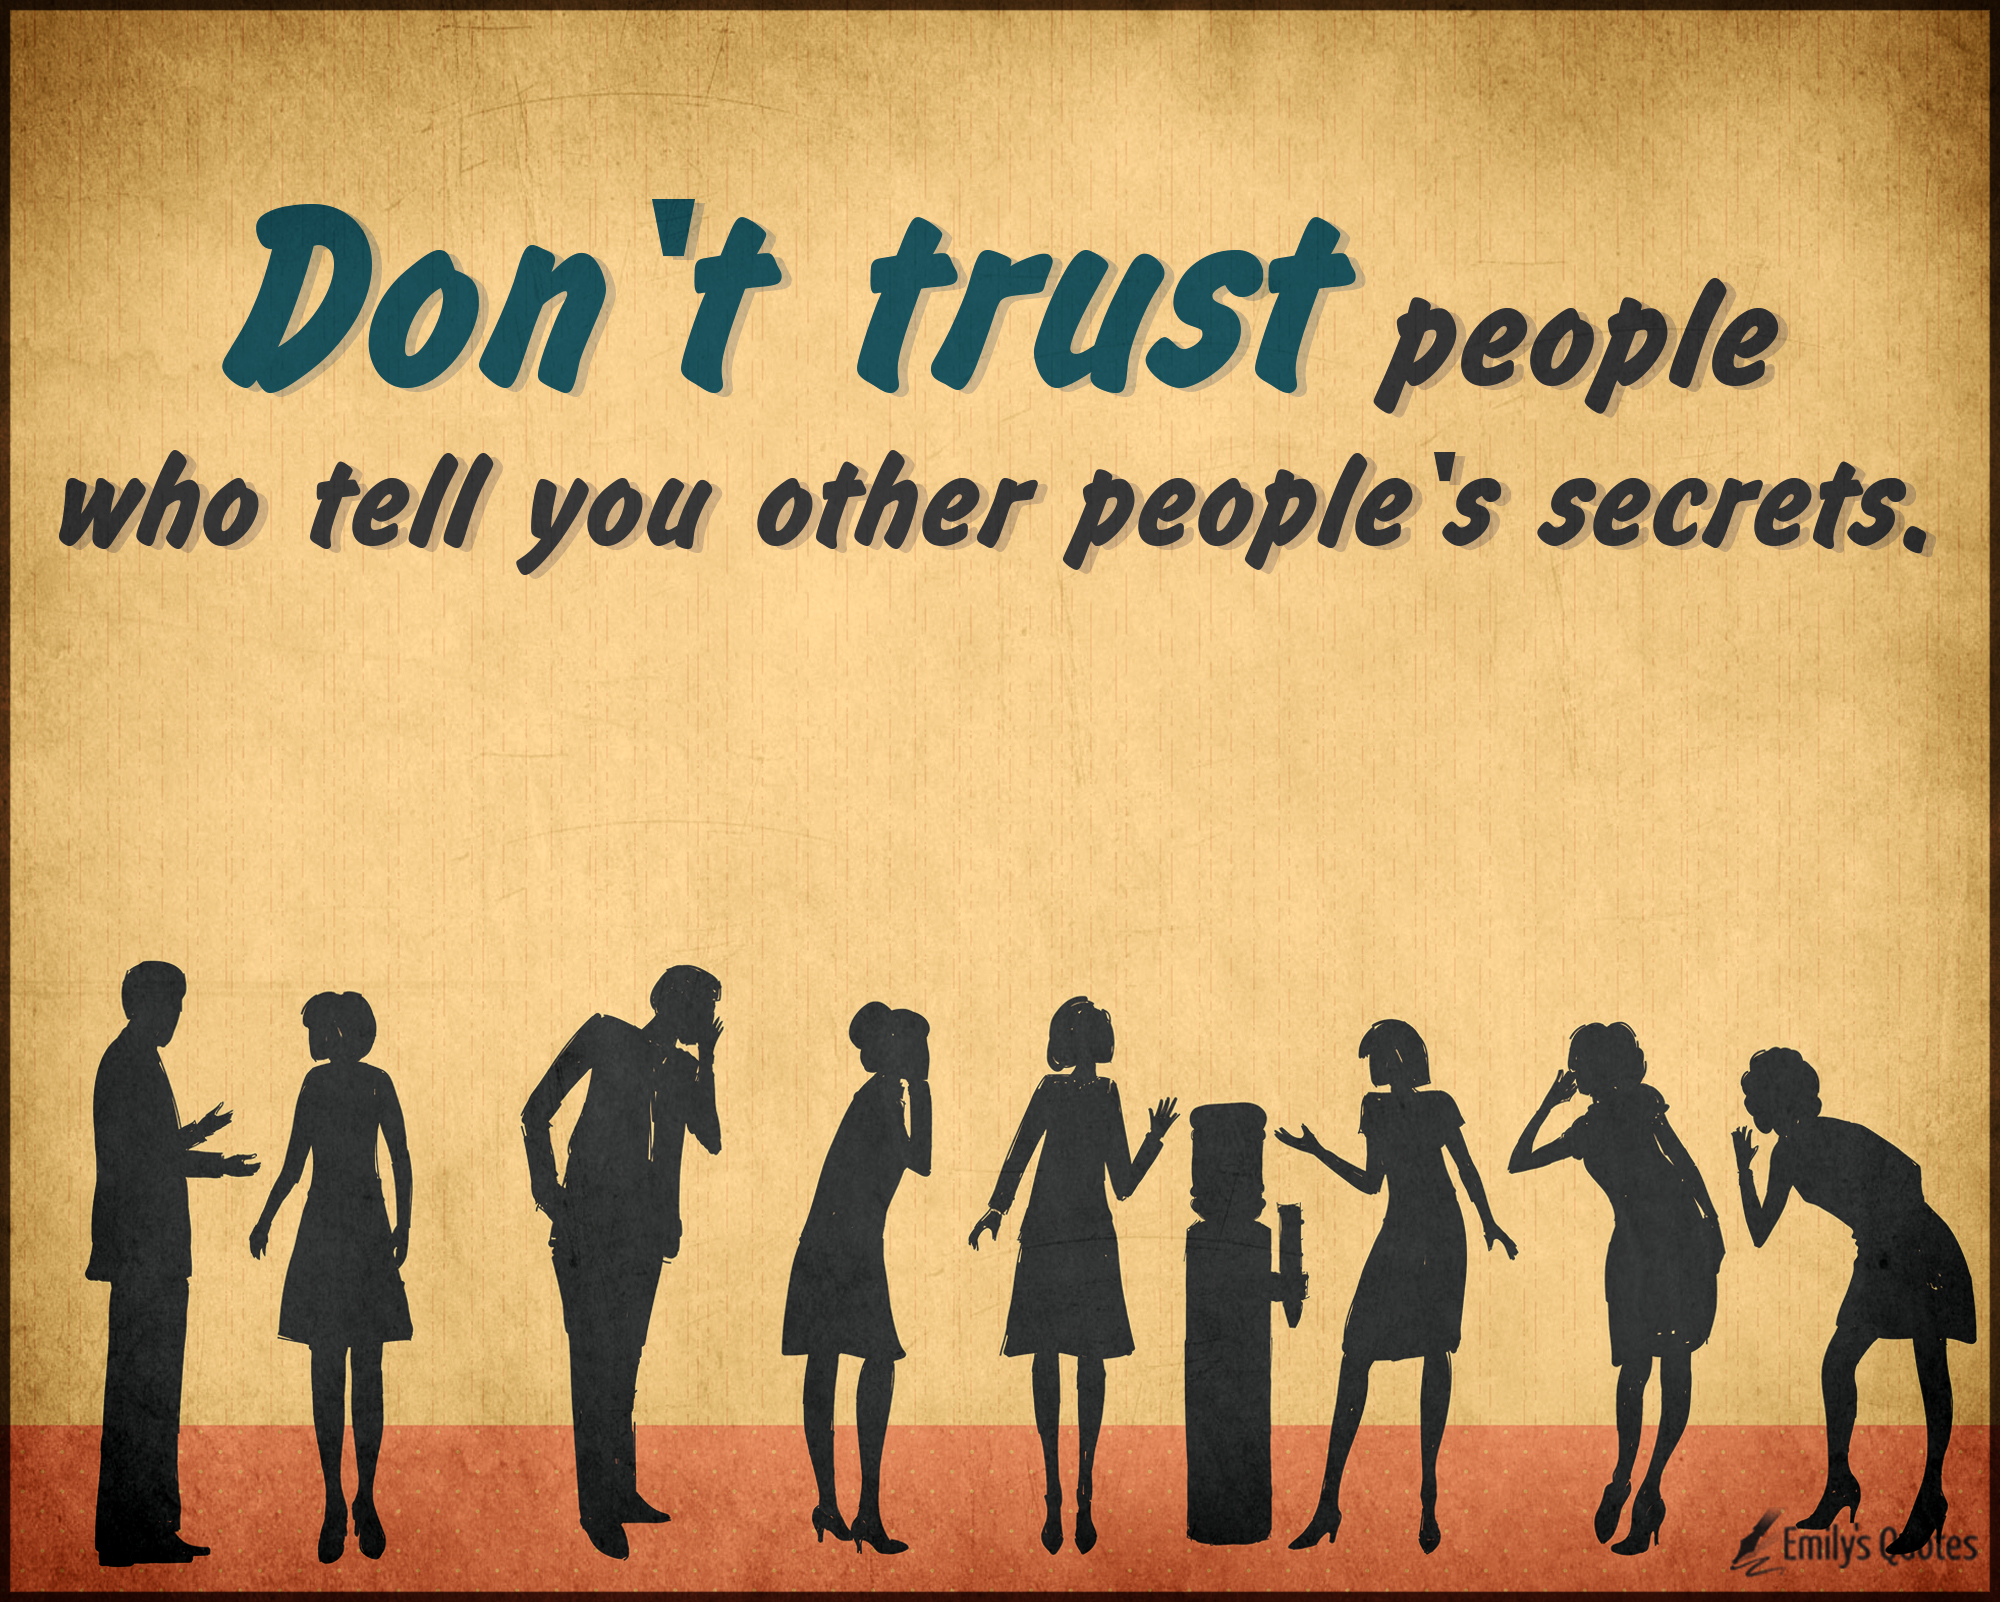 Don’t trust people who tell you other people’s secrets